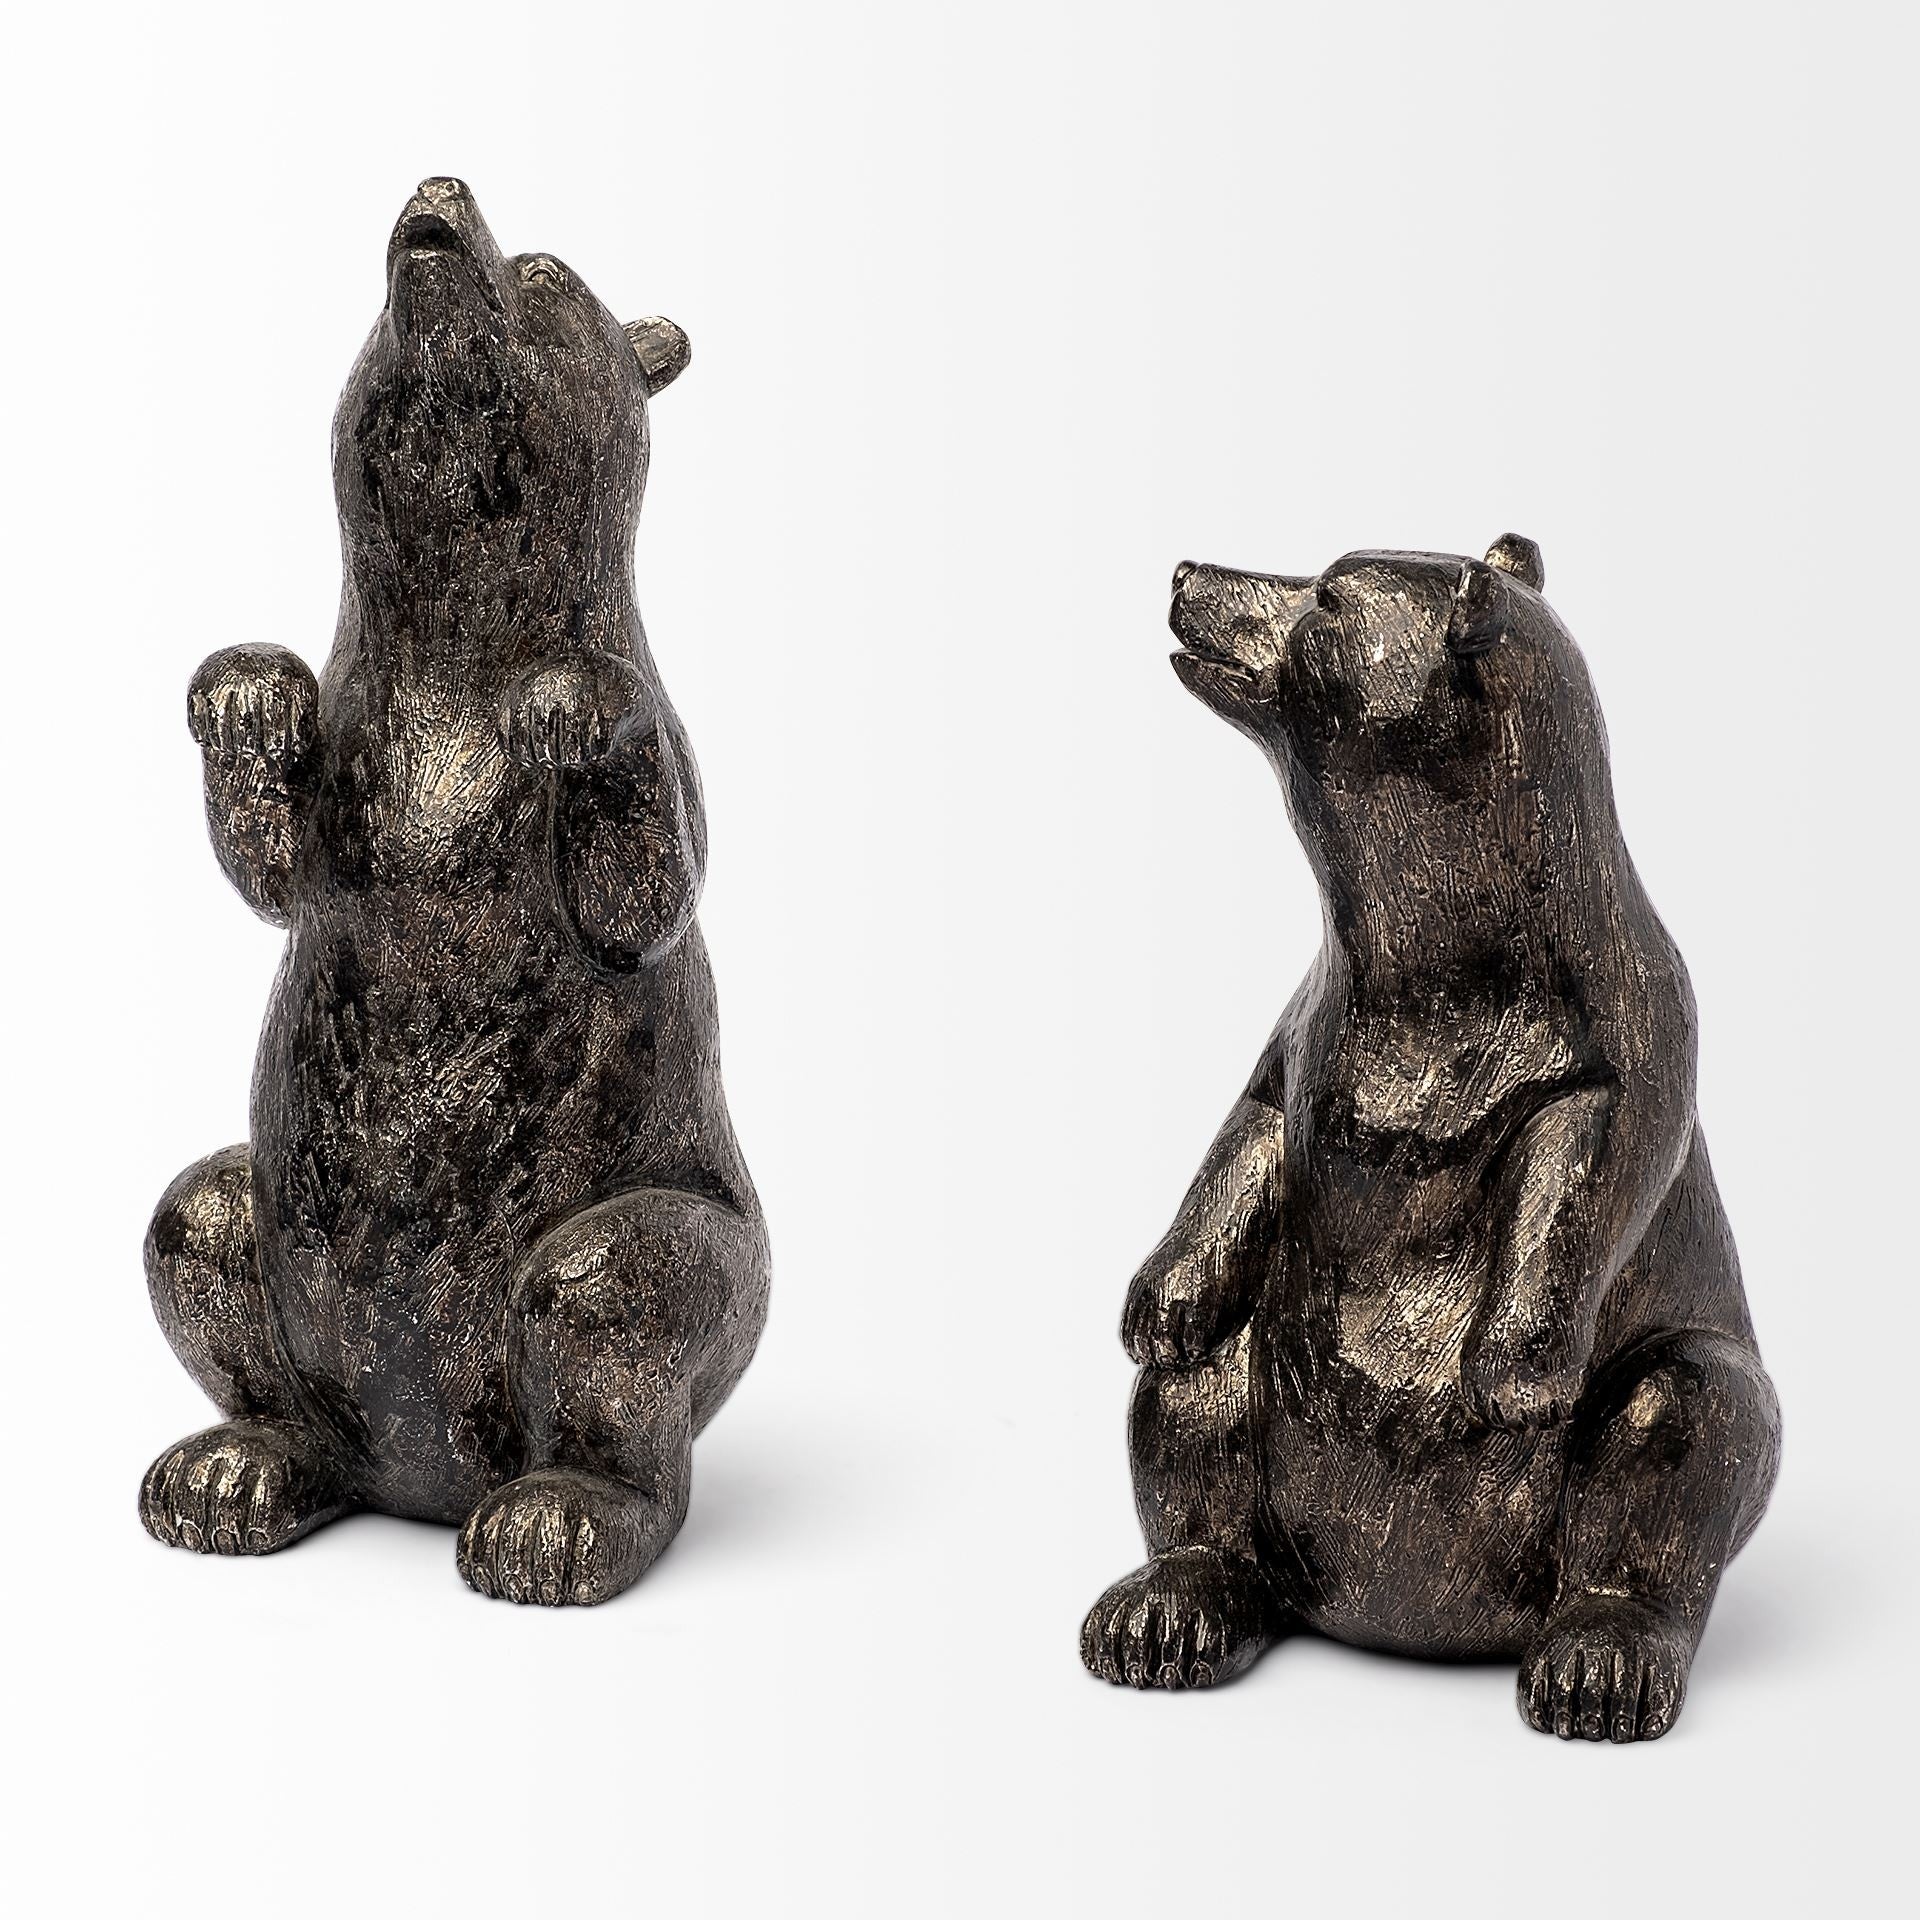 Metallic Tone Grizzly Bear Bookends